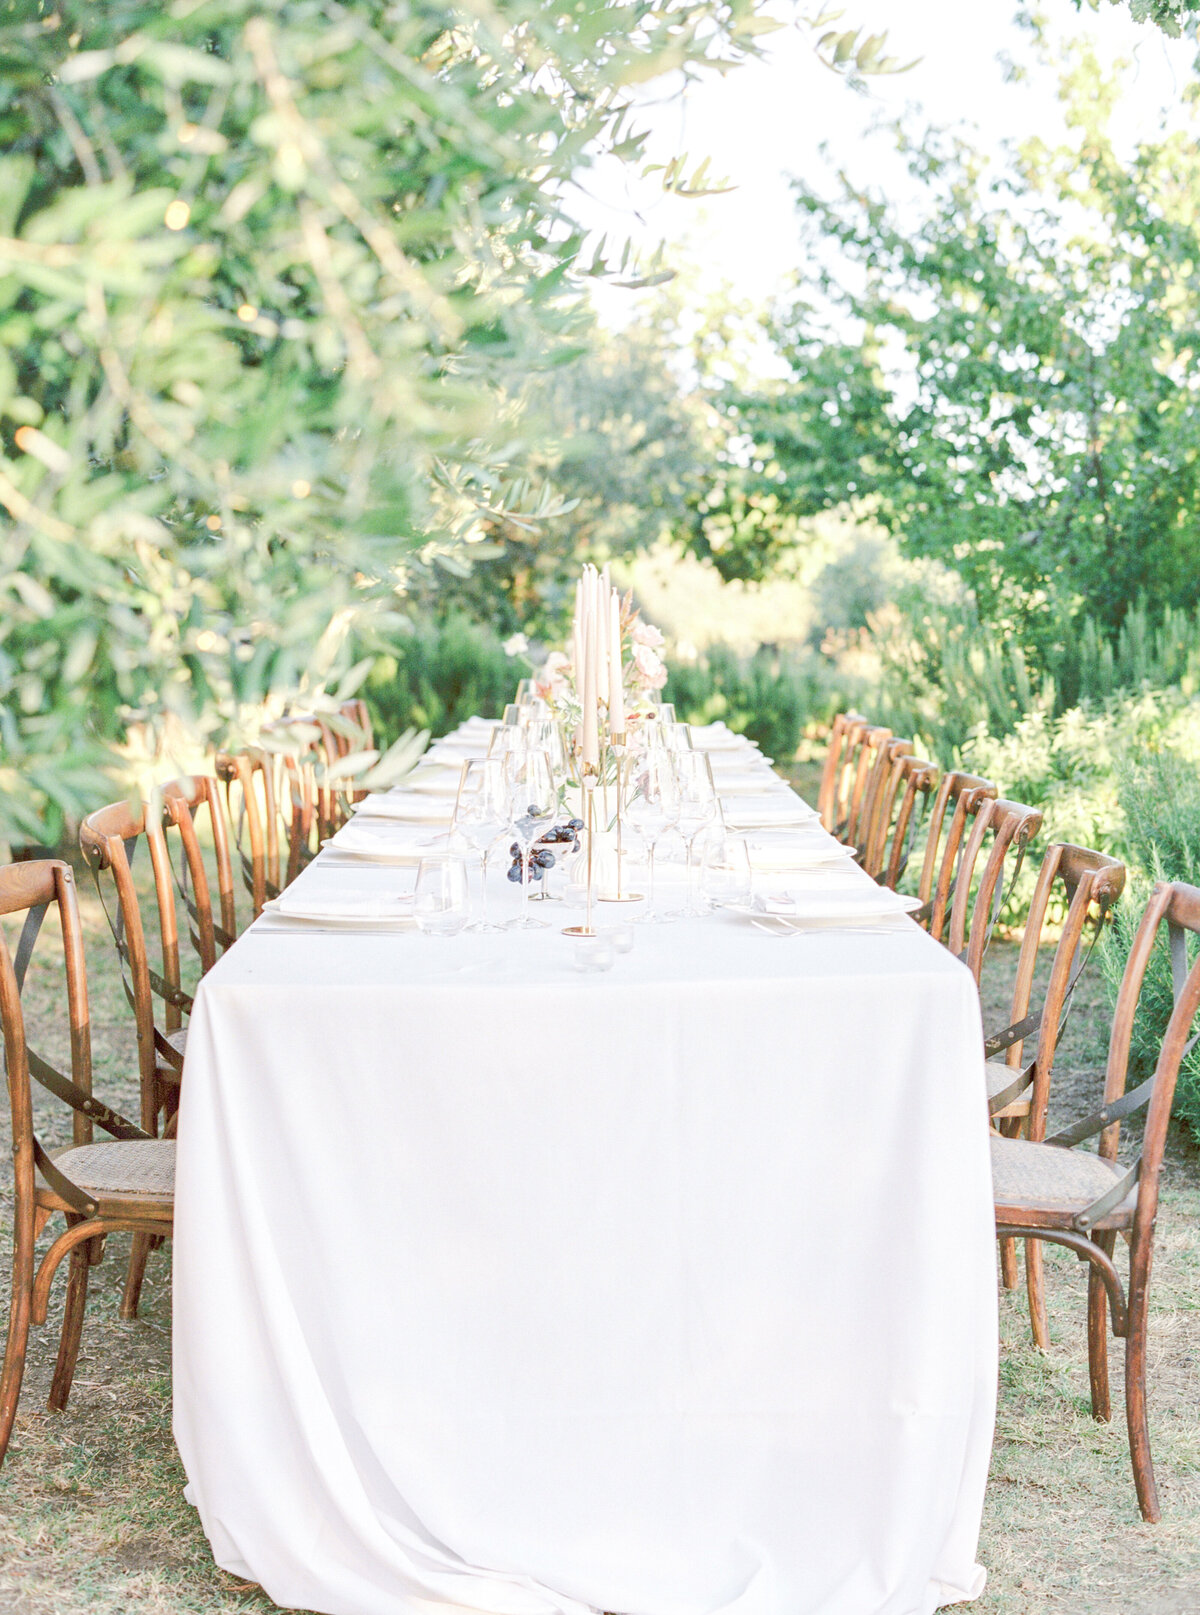 Film photograph of wedding reception table among olive trees photographed by Italy wedding photographer at Villa Montanare Tuscany wedding